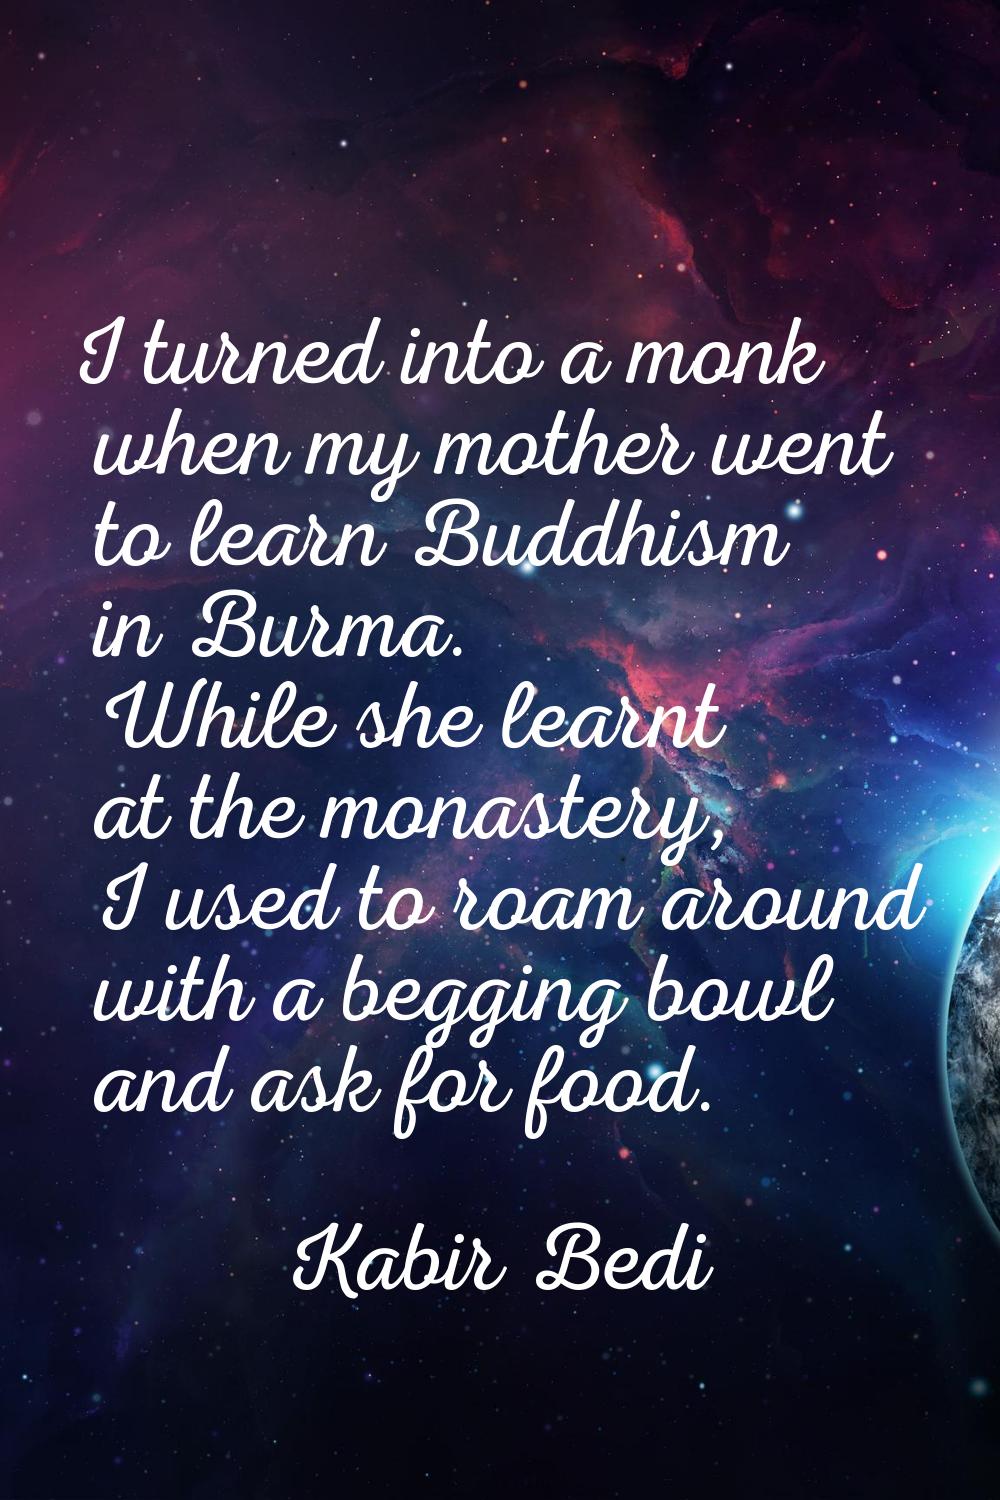 I turned into a monk when my mother went to learn Buddhism in Burma. While she learnt at the monast